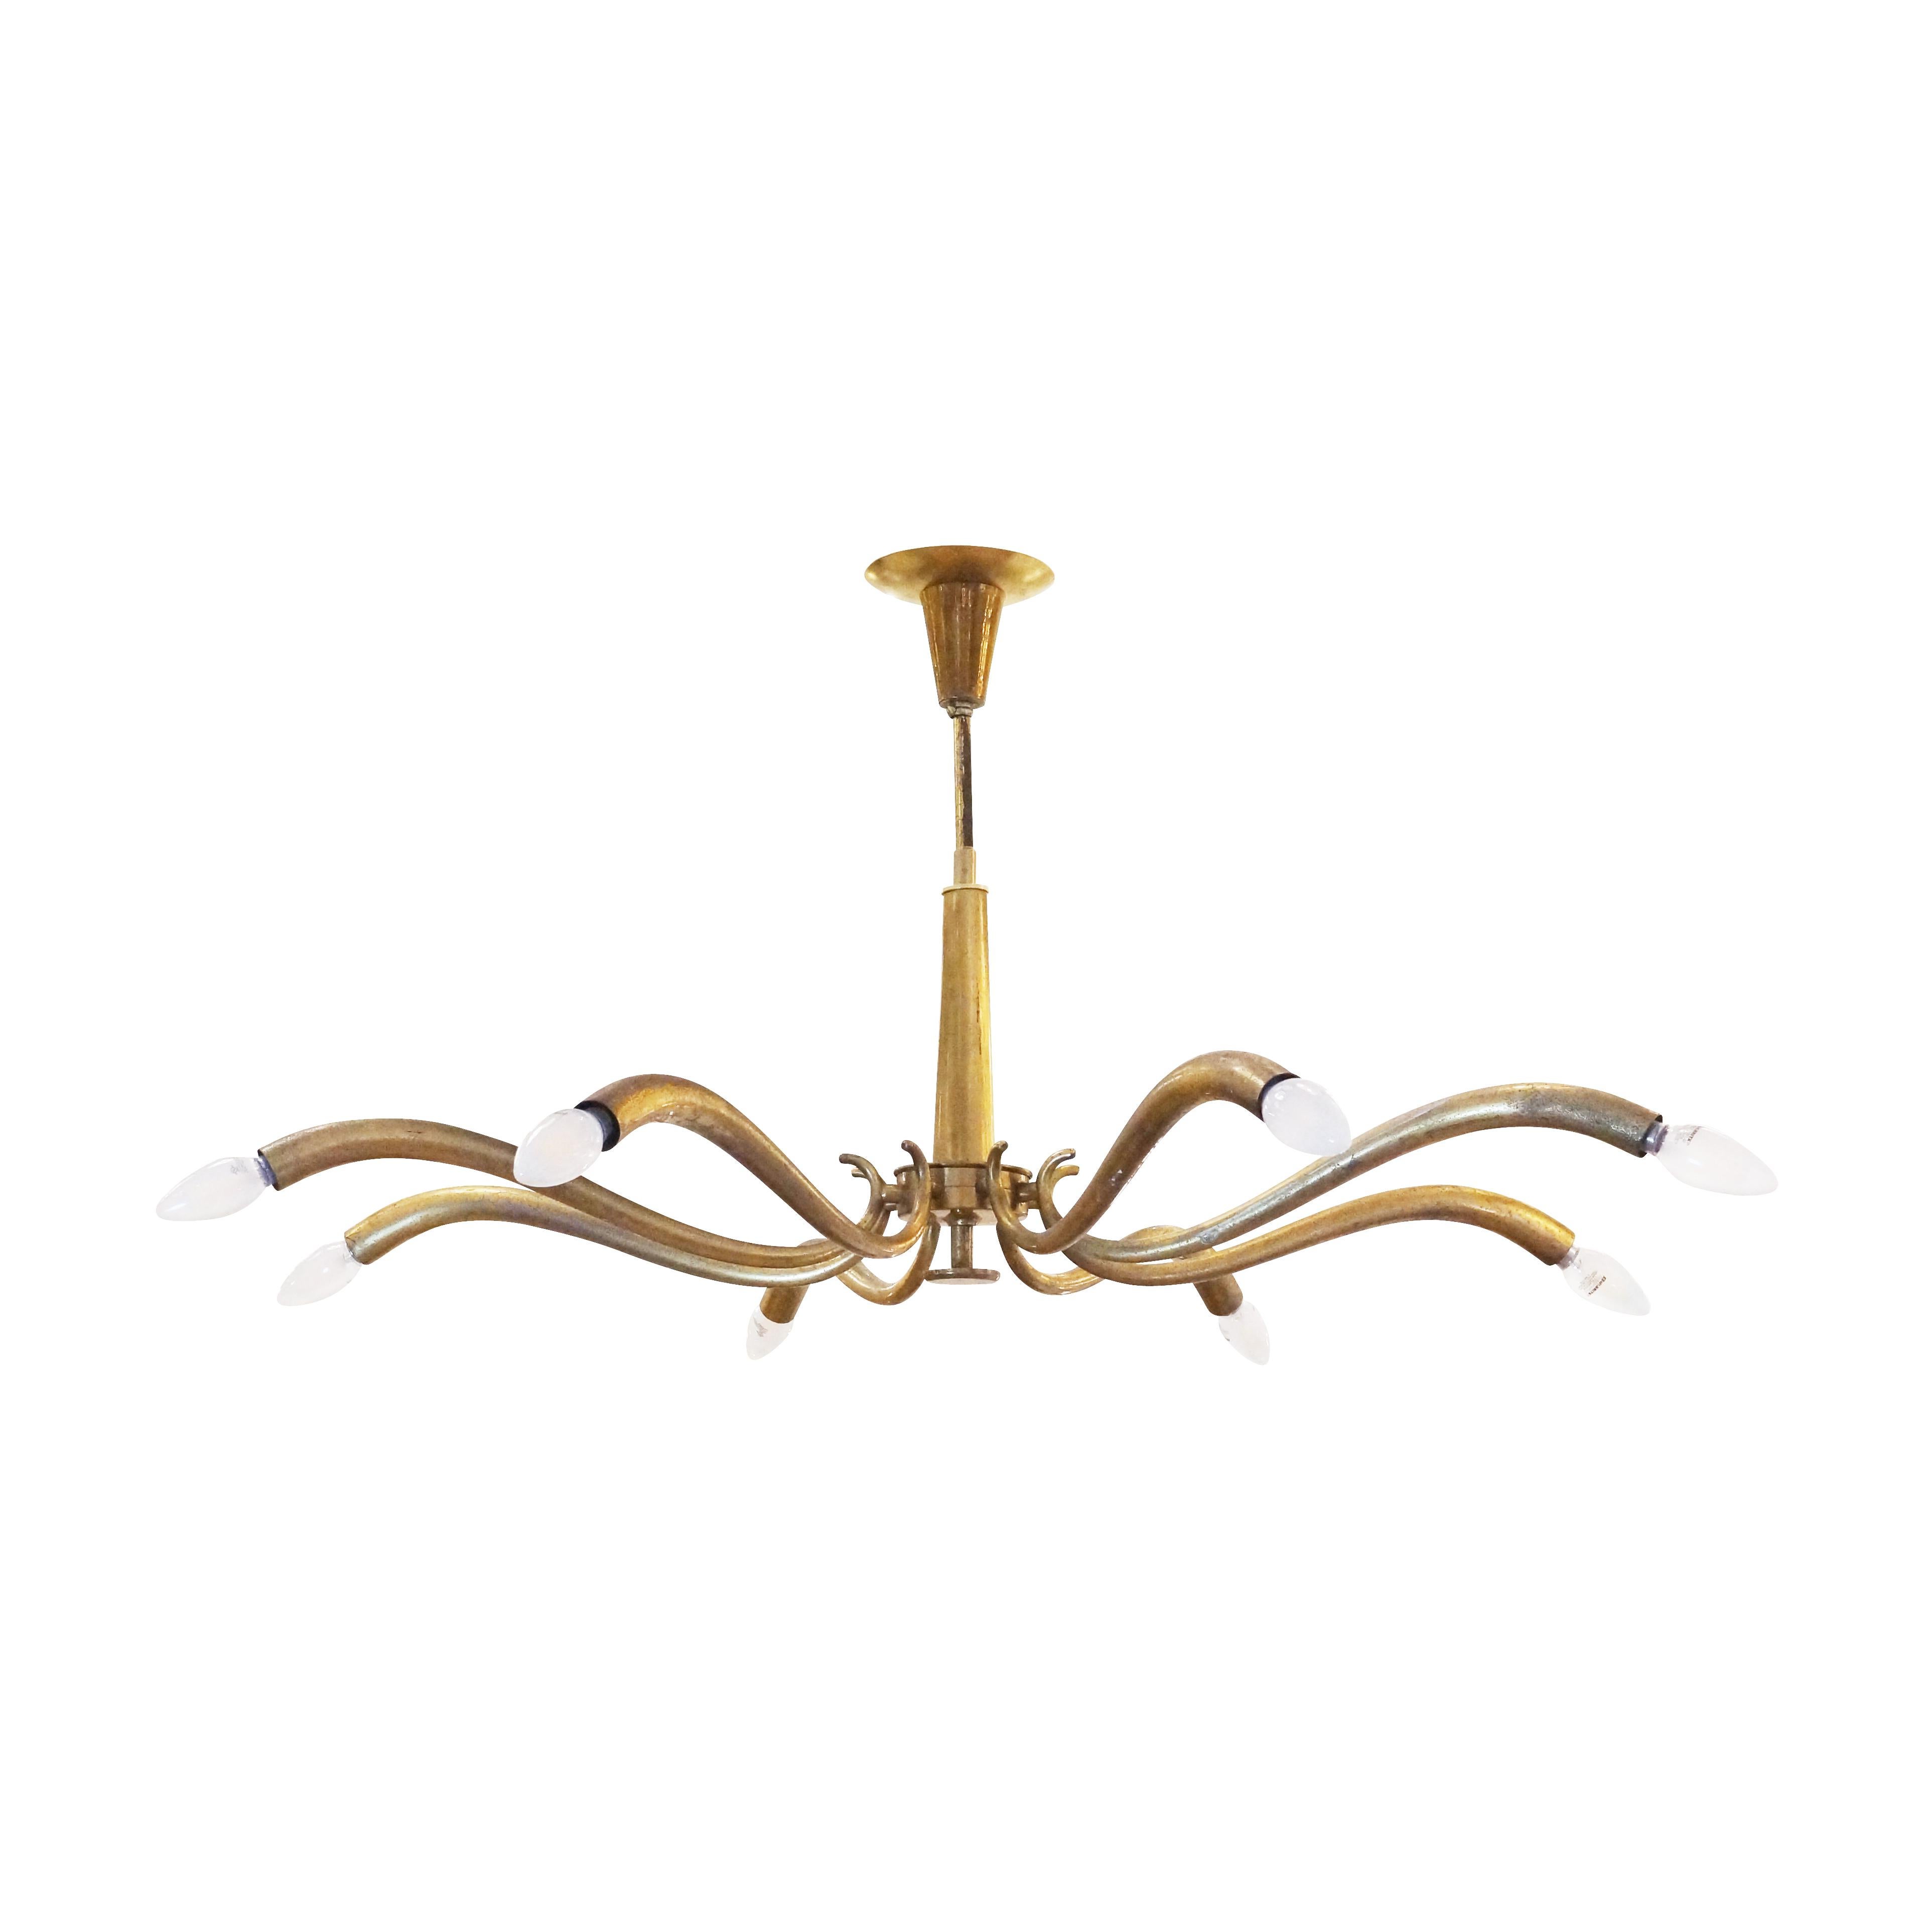 Italian Mid-Century chandelier by Oscar Torlasco for Lumi with sloping brass arms. Holds eight candelabra sockets.

Condition: Good vintage condition with some brass oxidation. Brass can be cleaned and polished on request. 

Diameter: 40”

Height: